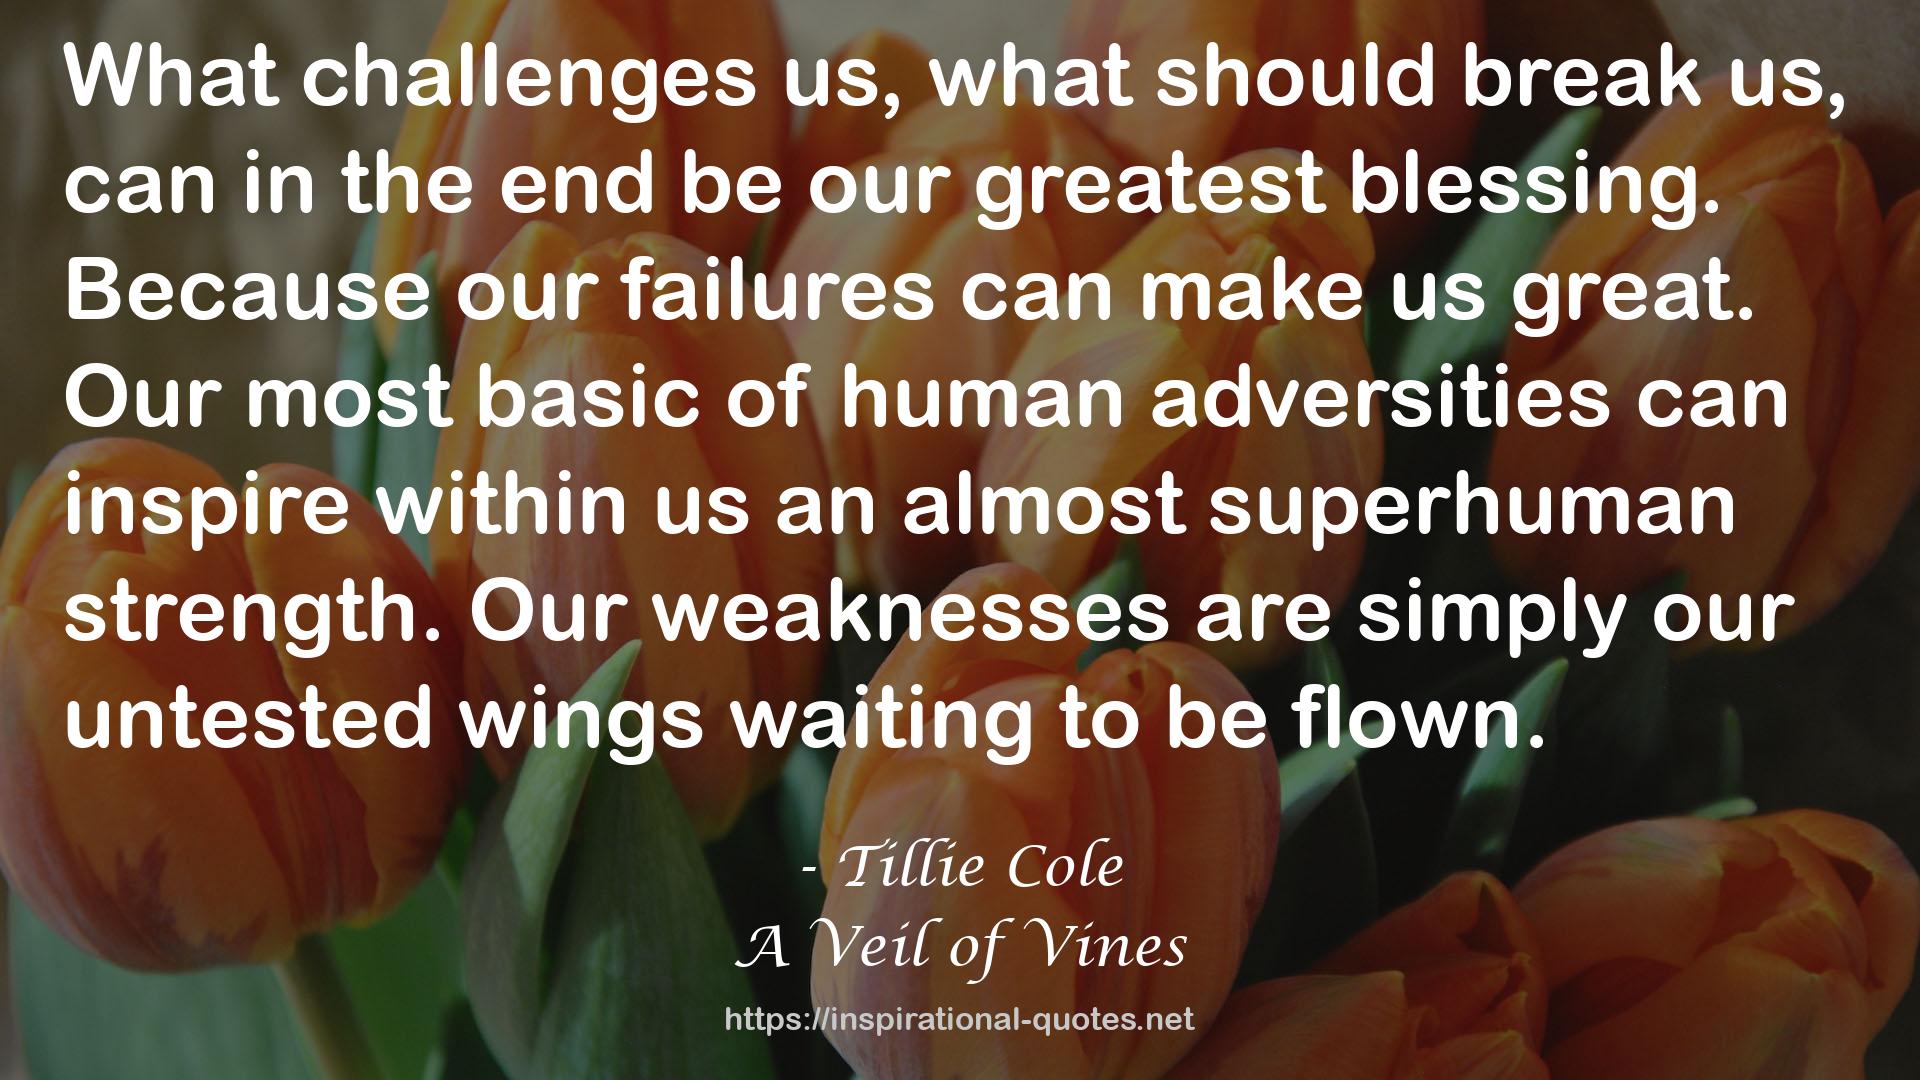 A Veil of Vines QUOTES